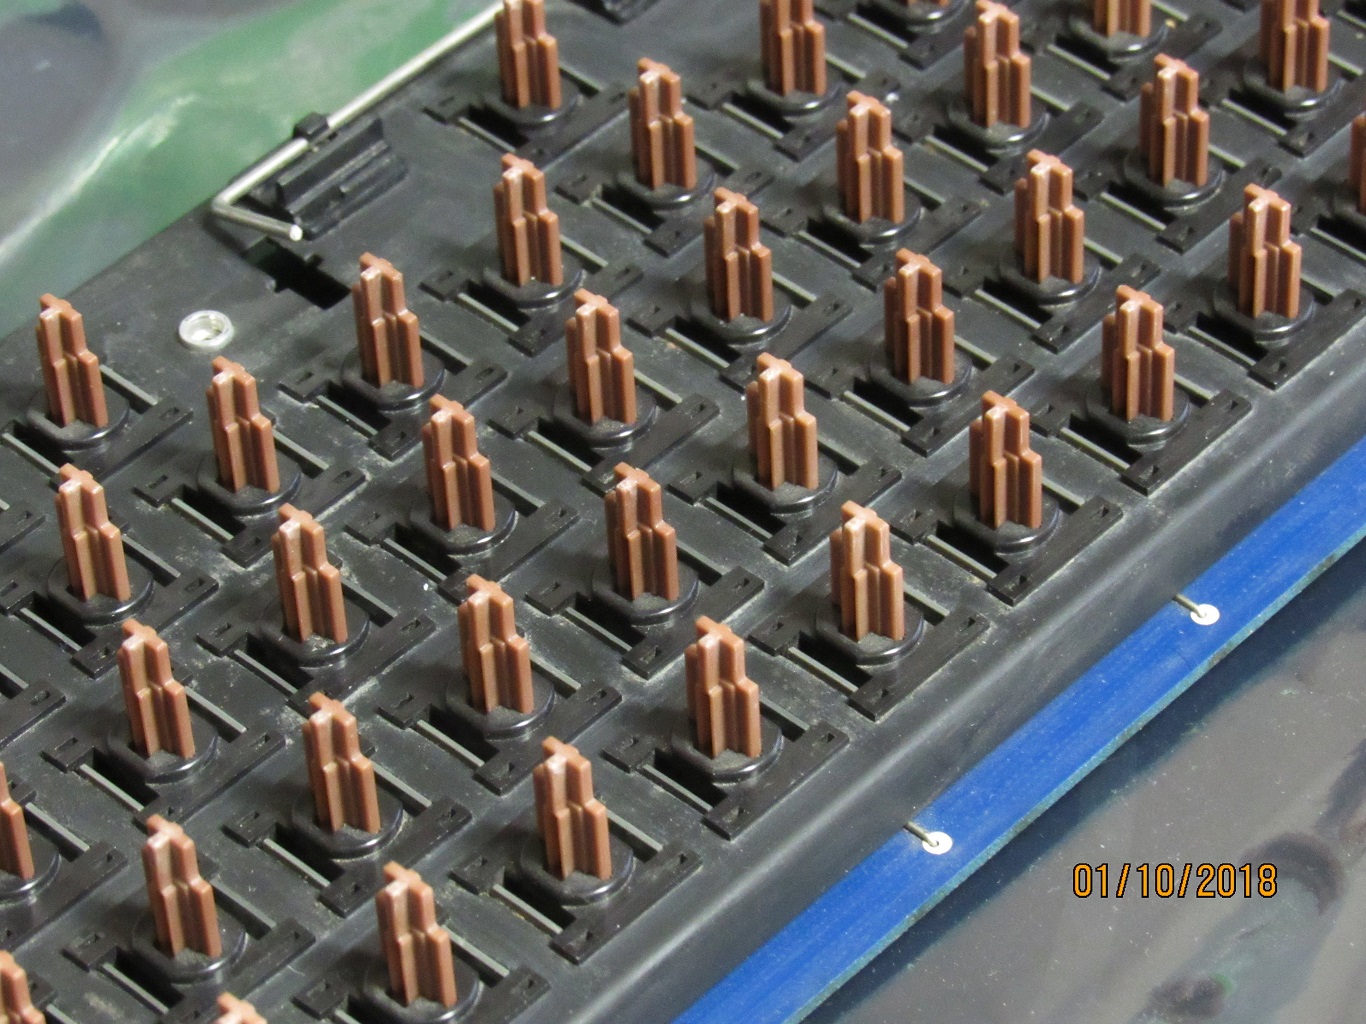 Keyboard mechanism top (sorry, don't have full pic)